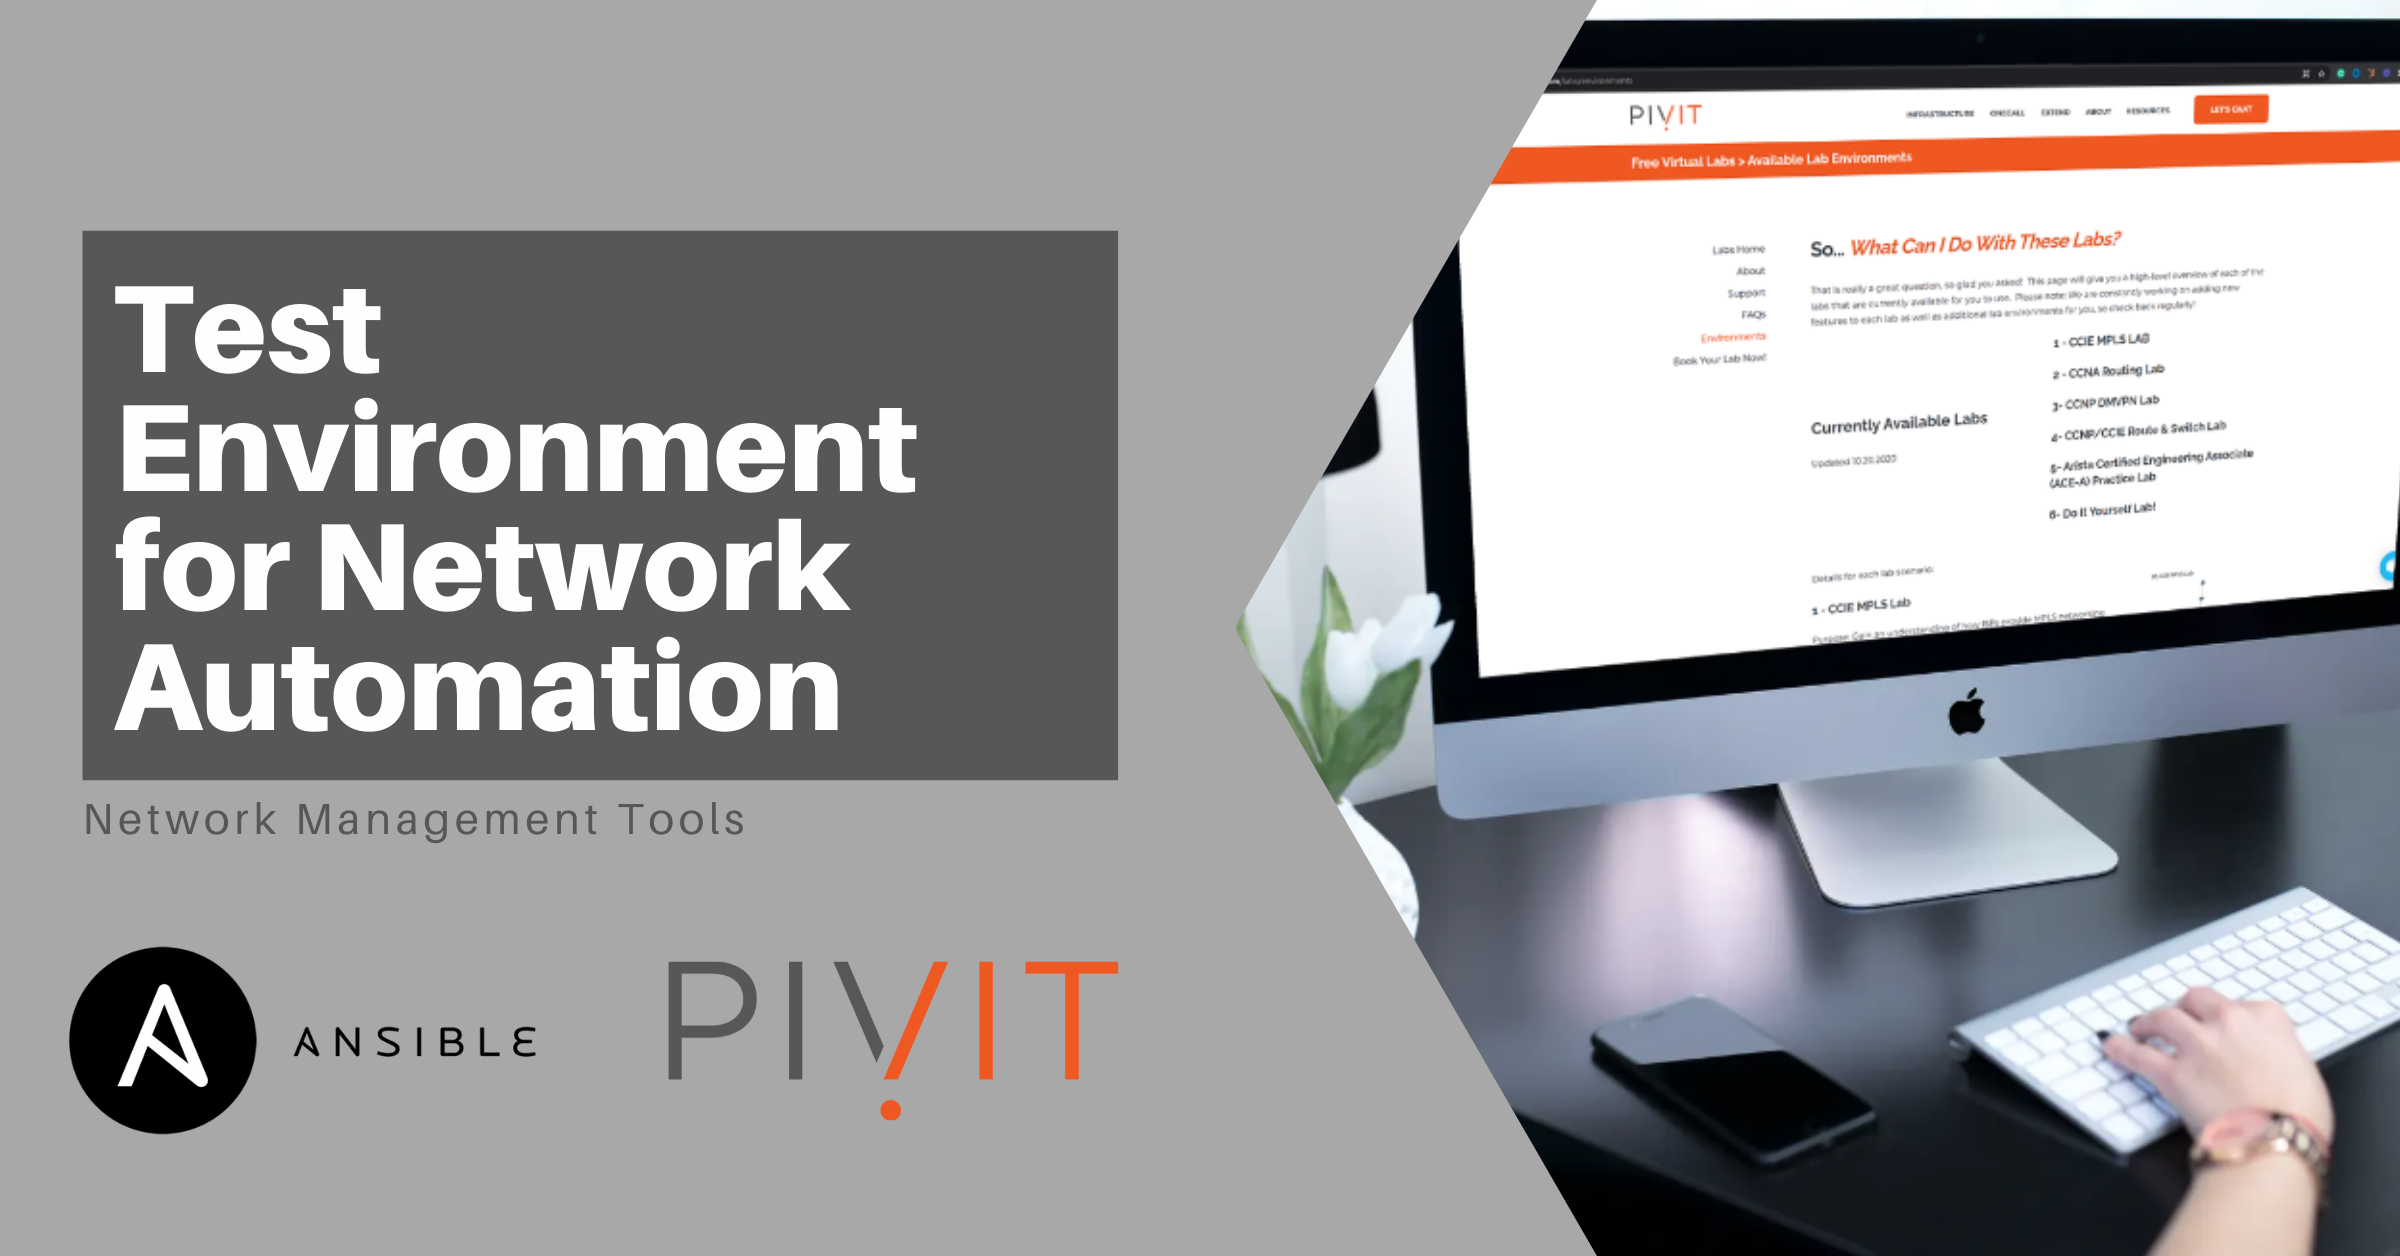 Test Environment for Network Automation - Network Management Tools